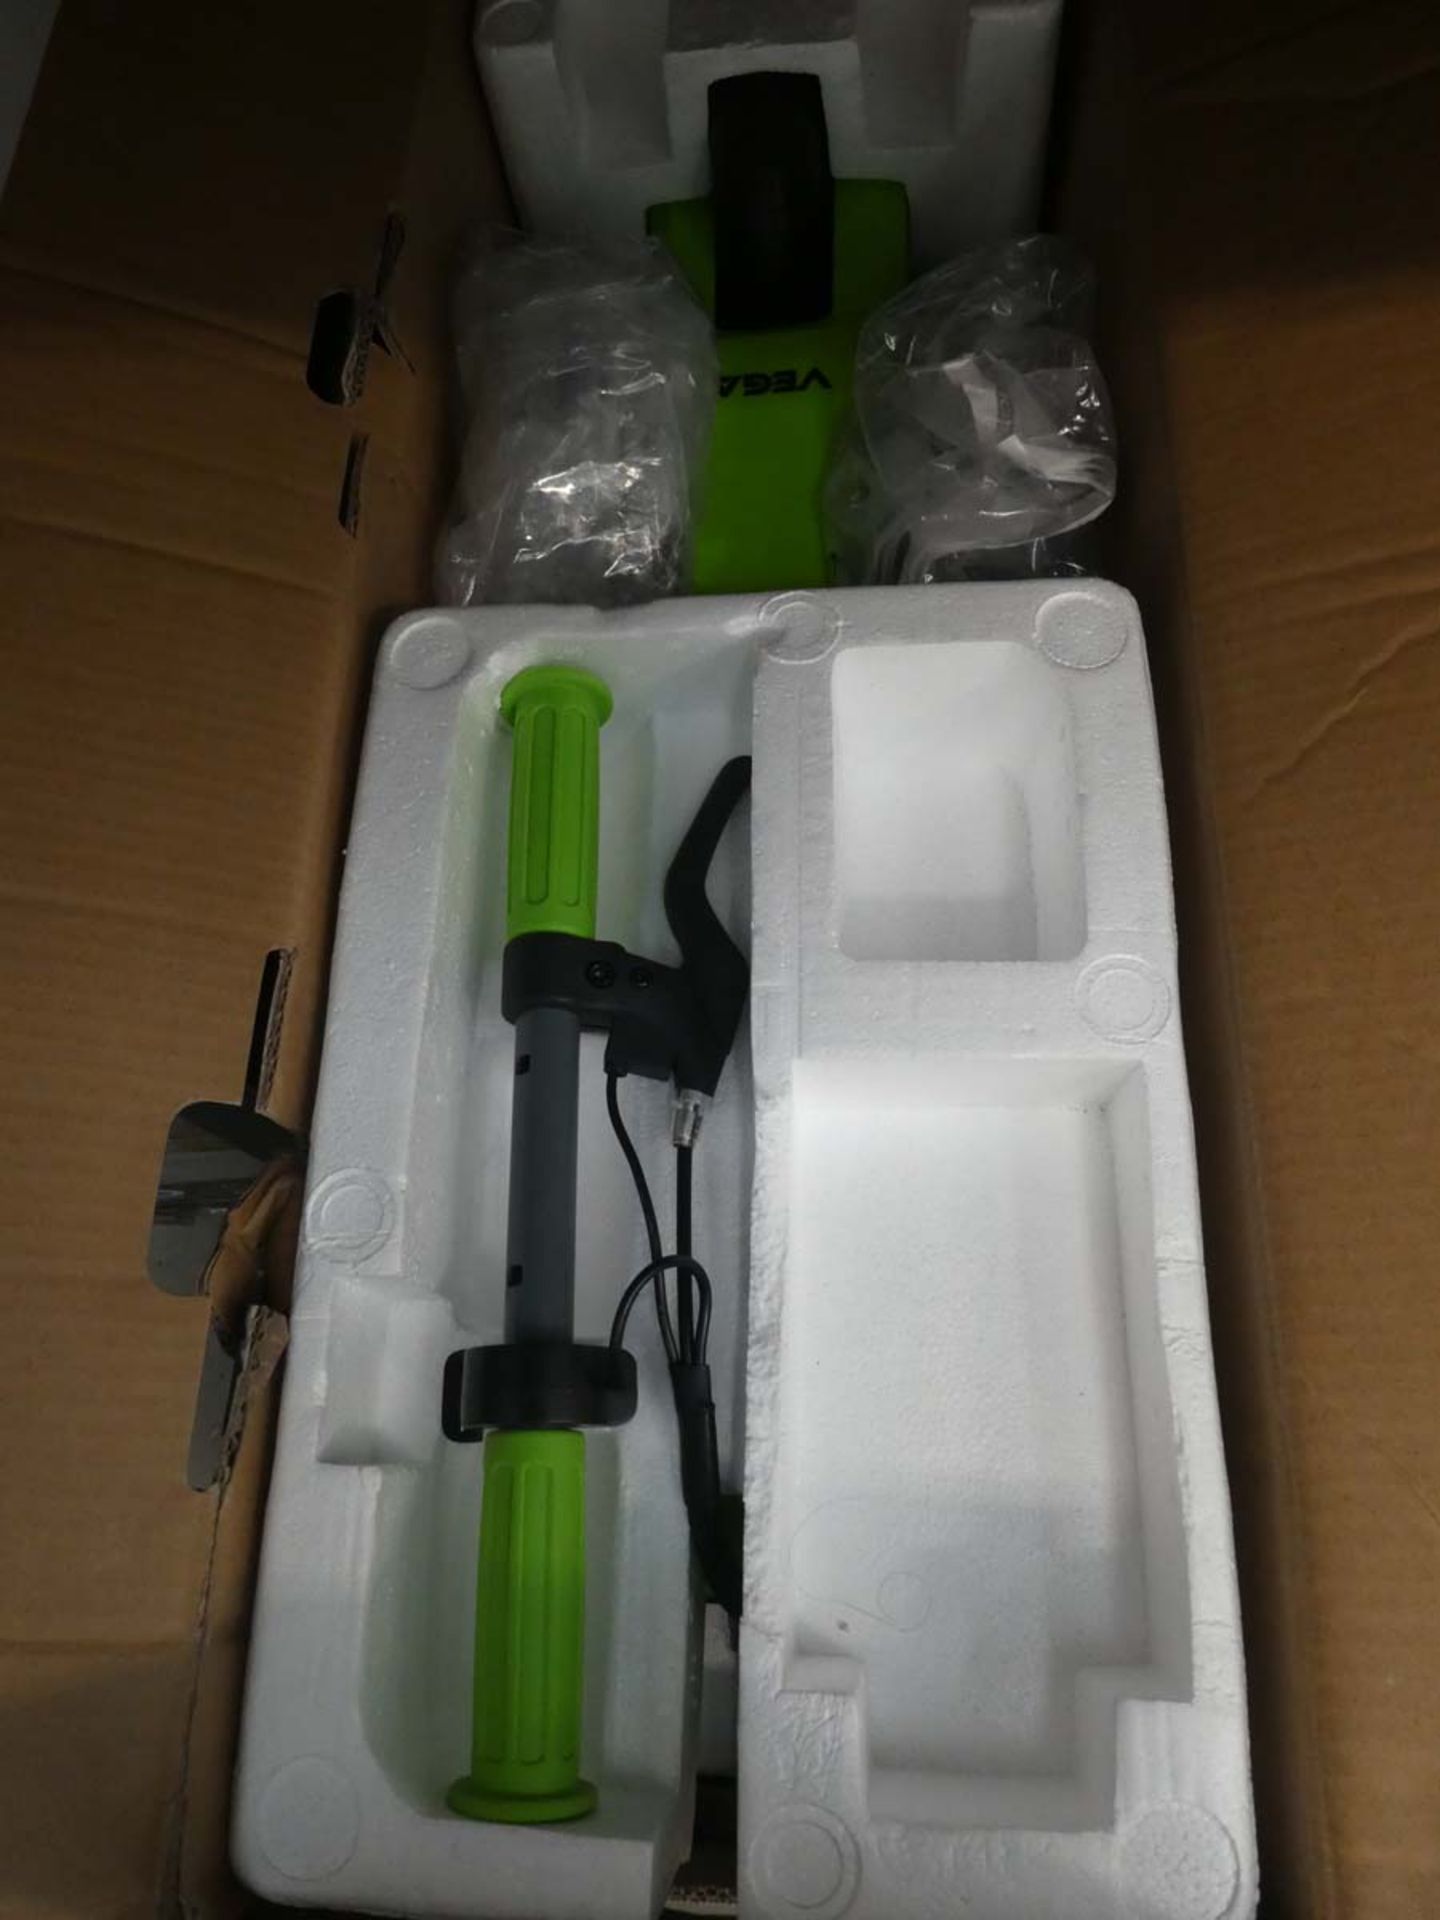 2 Vega boxed electric scooters - Image 2 of 2